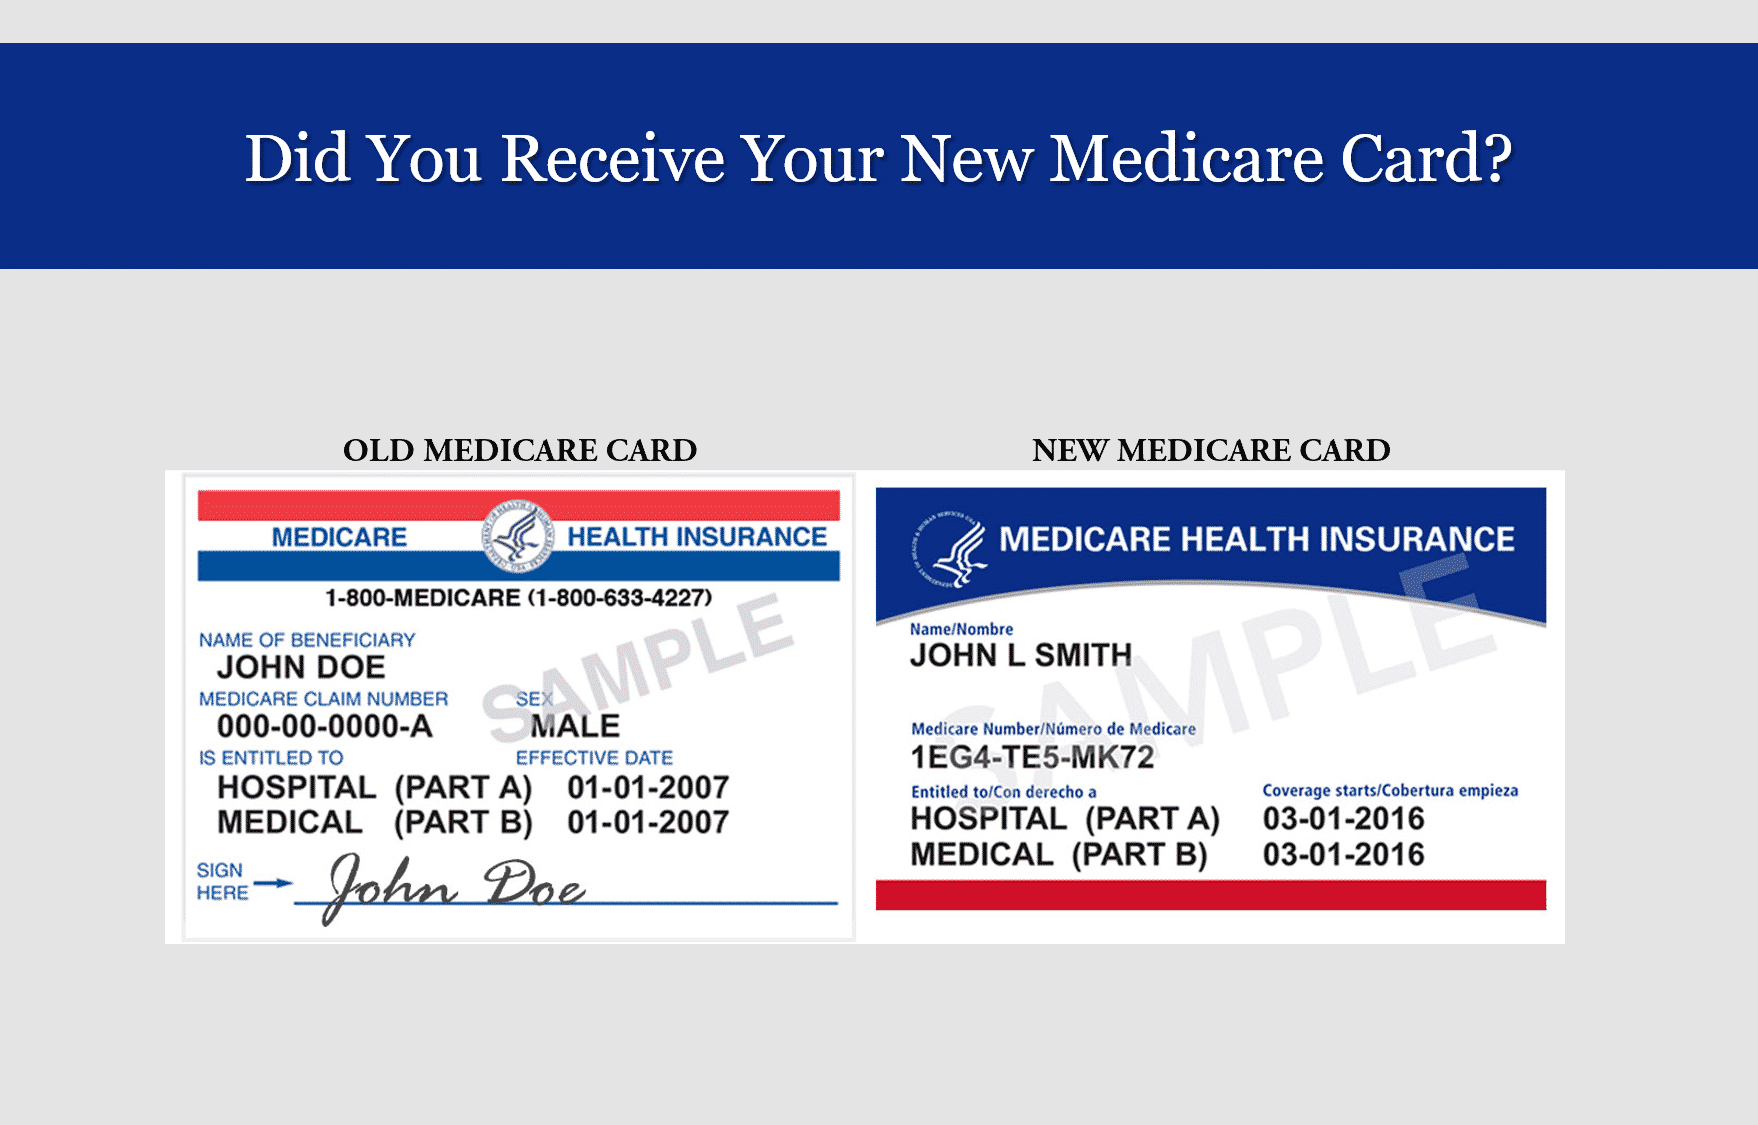 Did You Receive Your New Medicare Card?